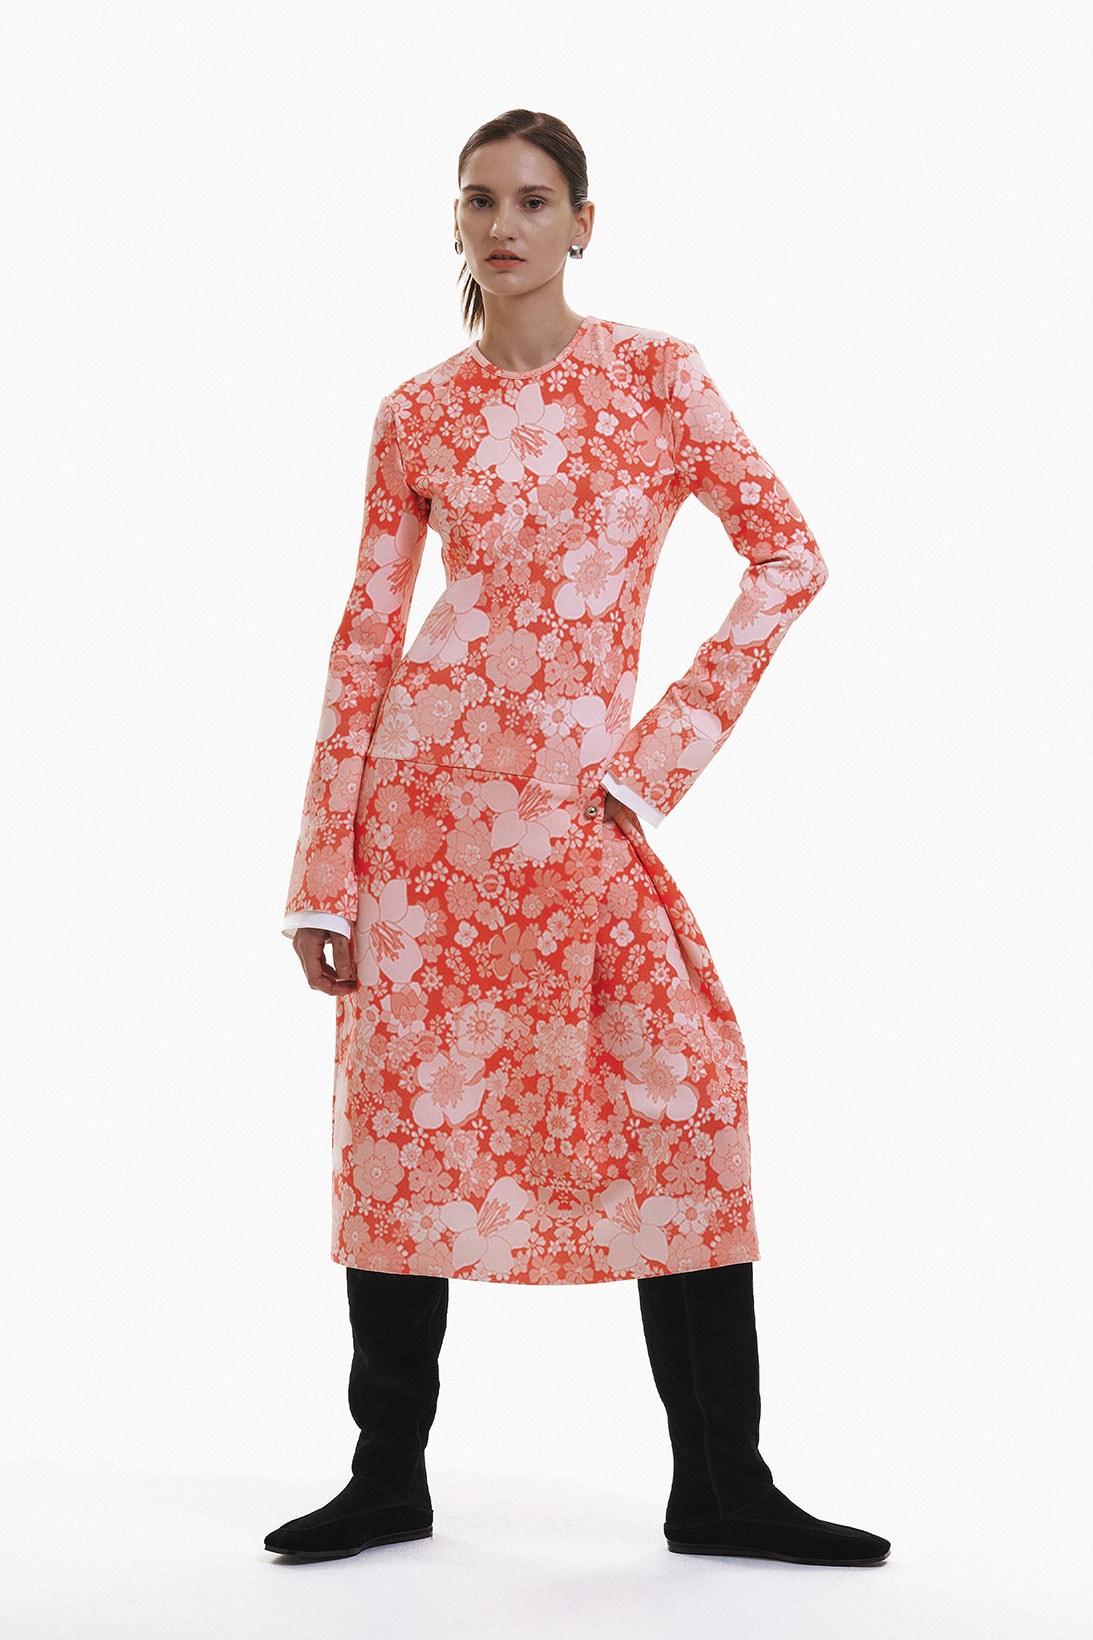 YUNSÉ Fall/Winter 2021 Collection Lookbook Tension and Relaxation Flower Print Dress Boots